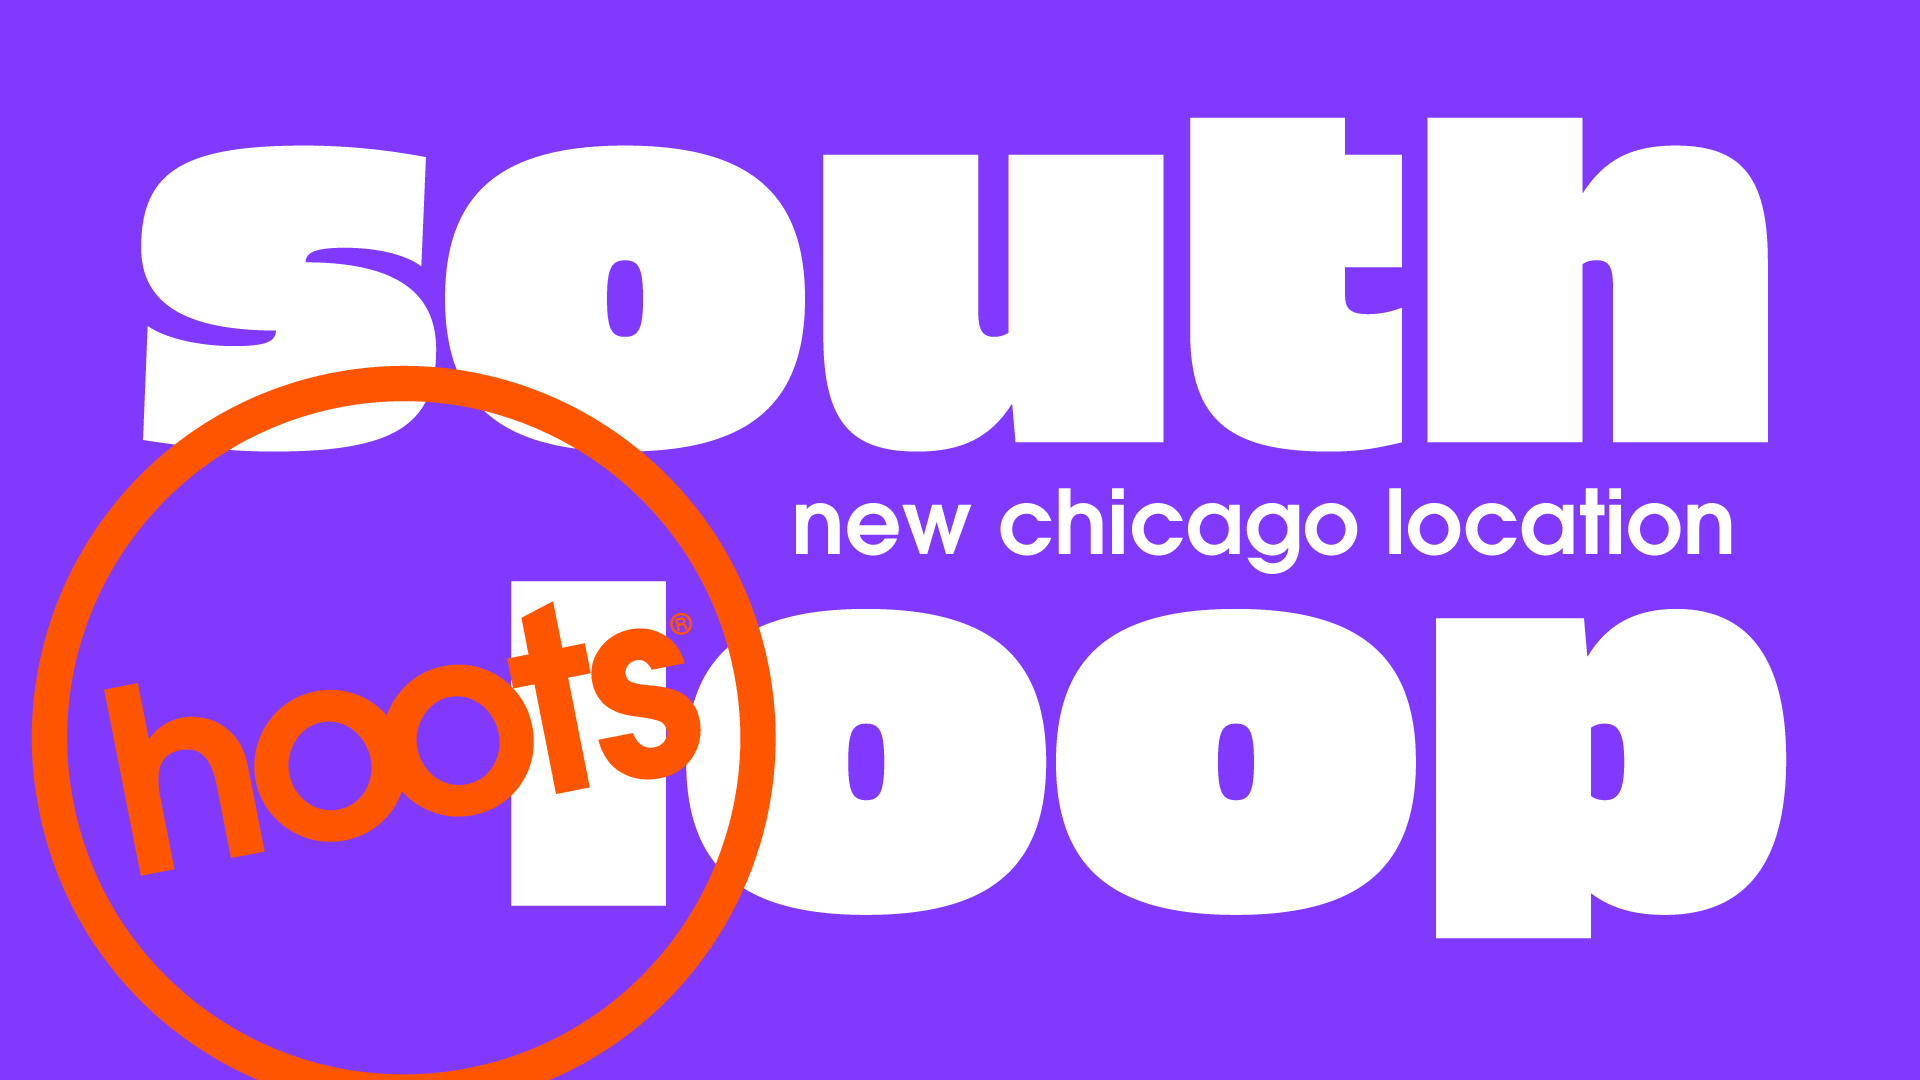 Hoots South Loop - New Chicago Location